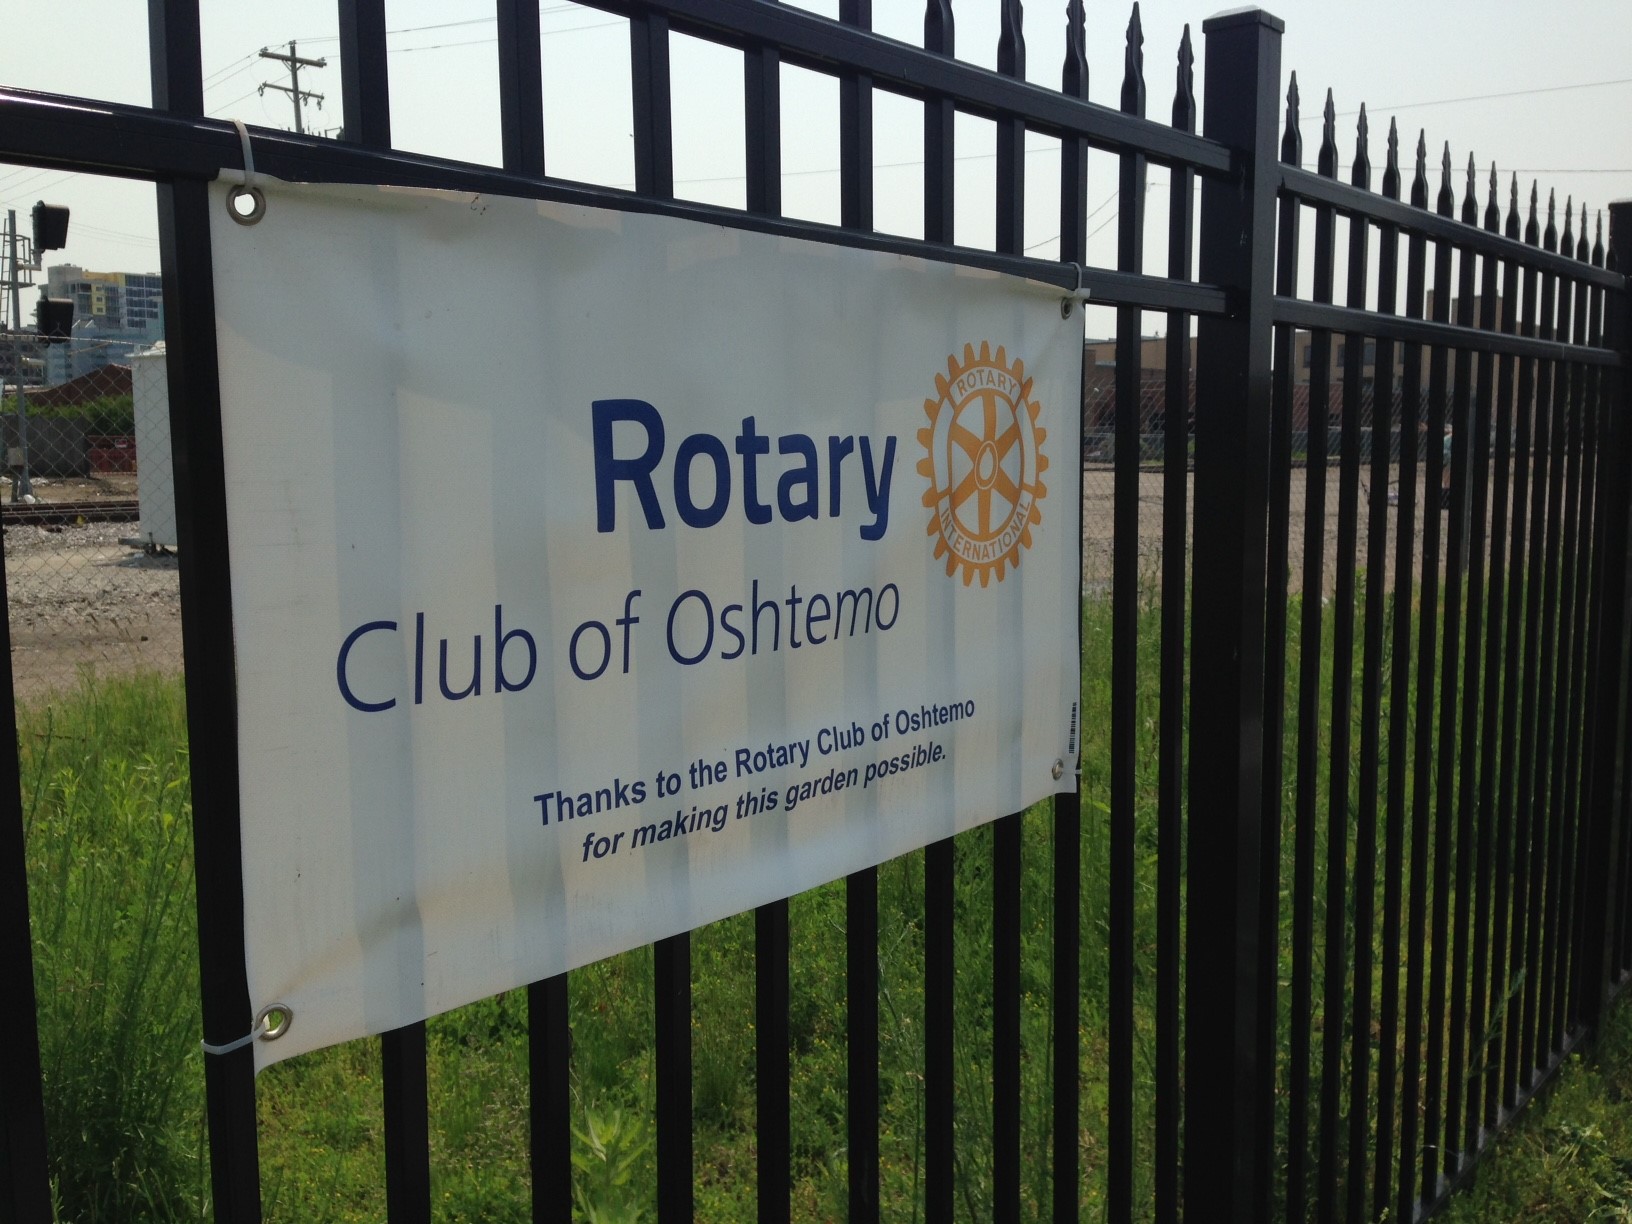  Thanks to the Rotary Club of Oshtemo for making our garden possible! 